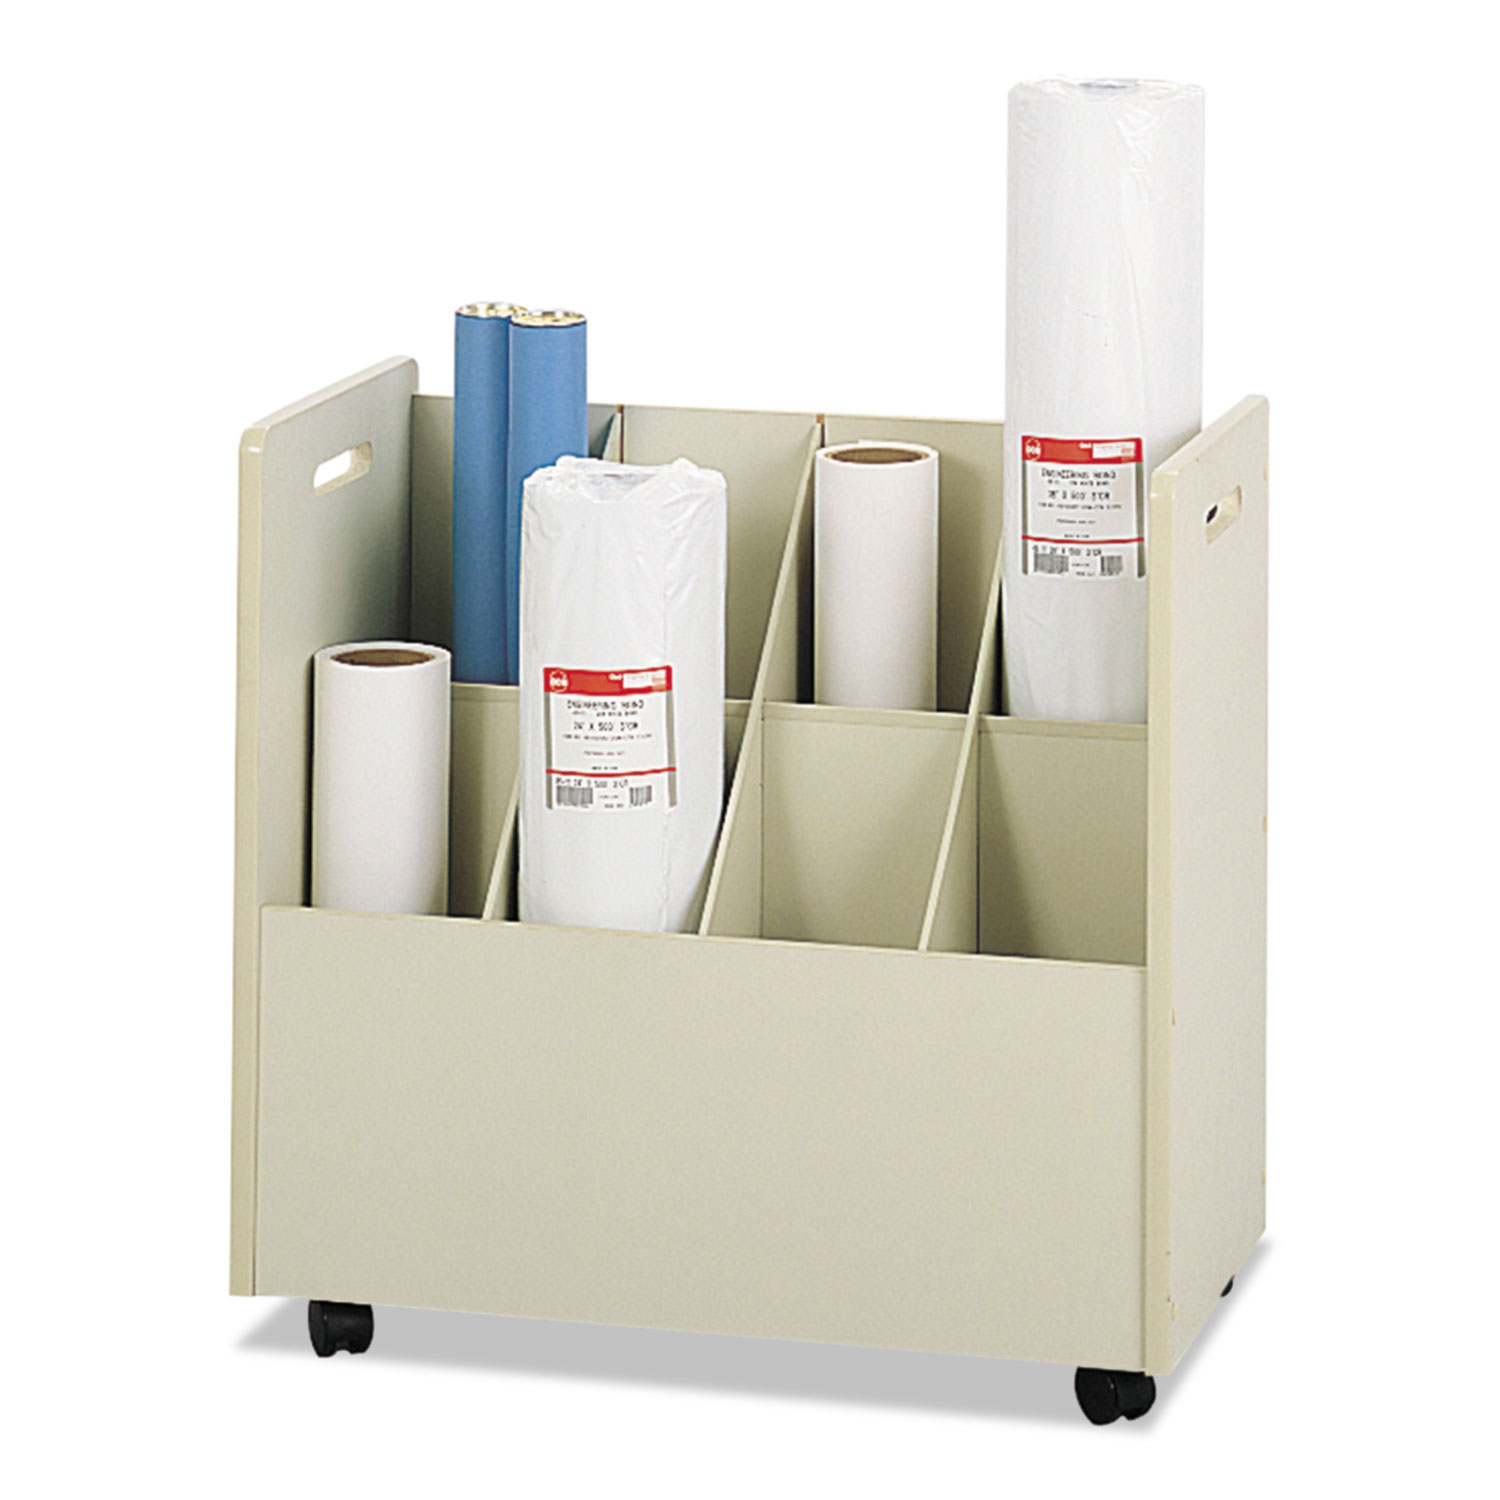  Safco 3045 Laminate Mobile Roll Files, 8 Compartments, 30.13w x 15.75d x 29.25h, Putty (SAF3045) 